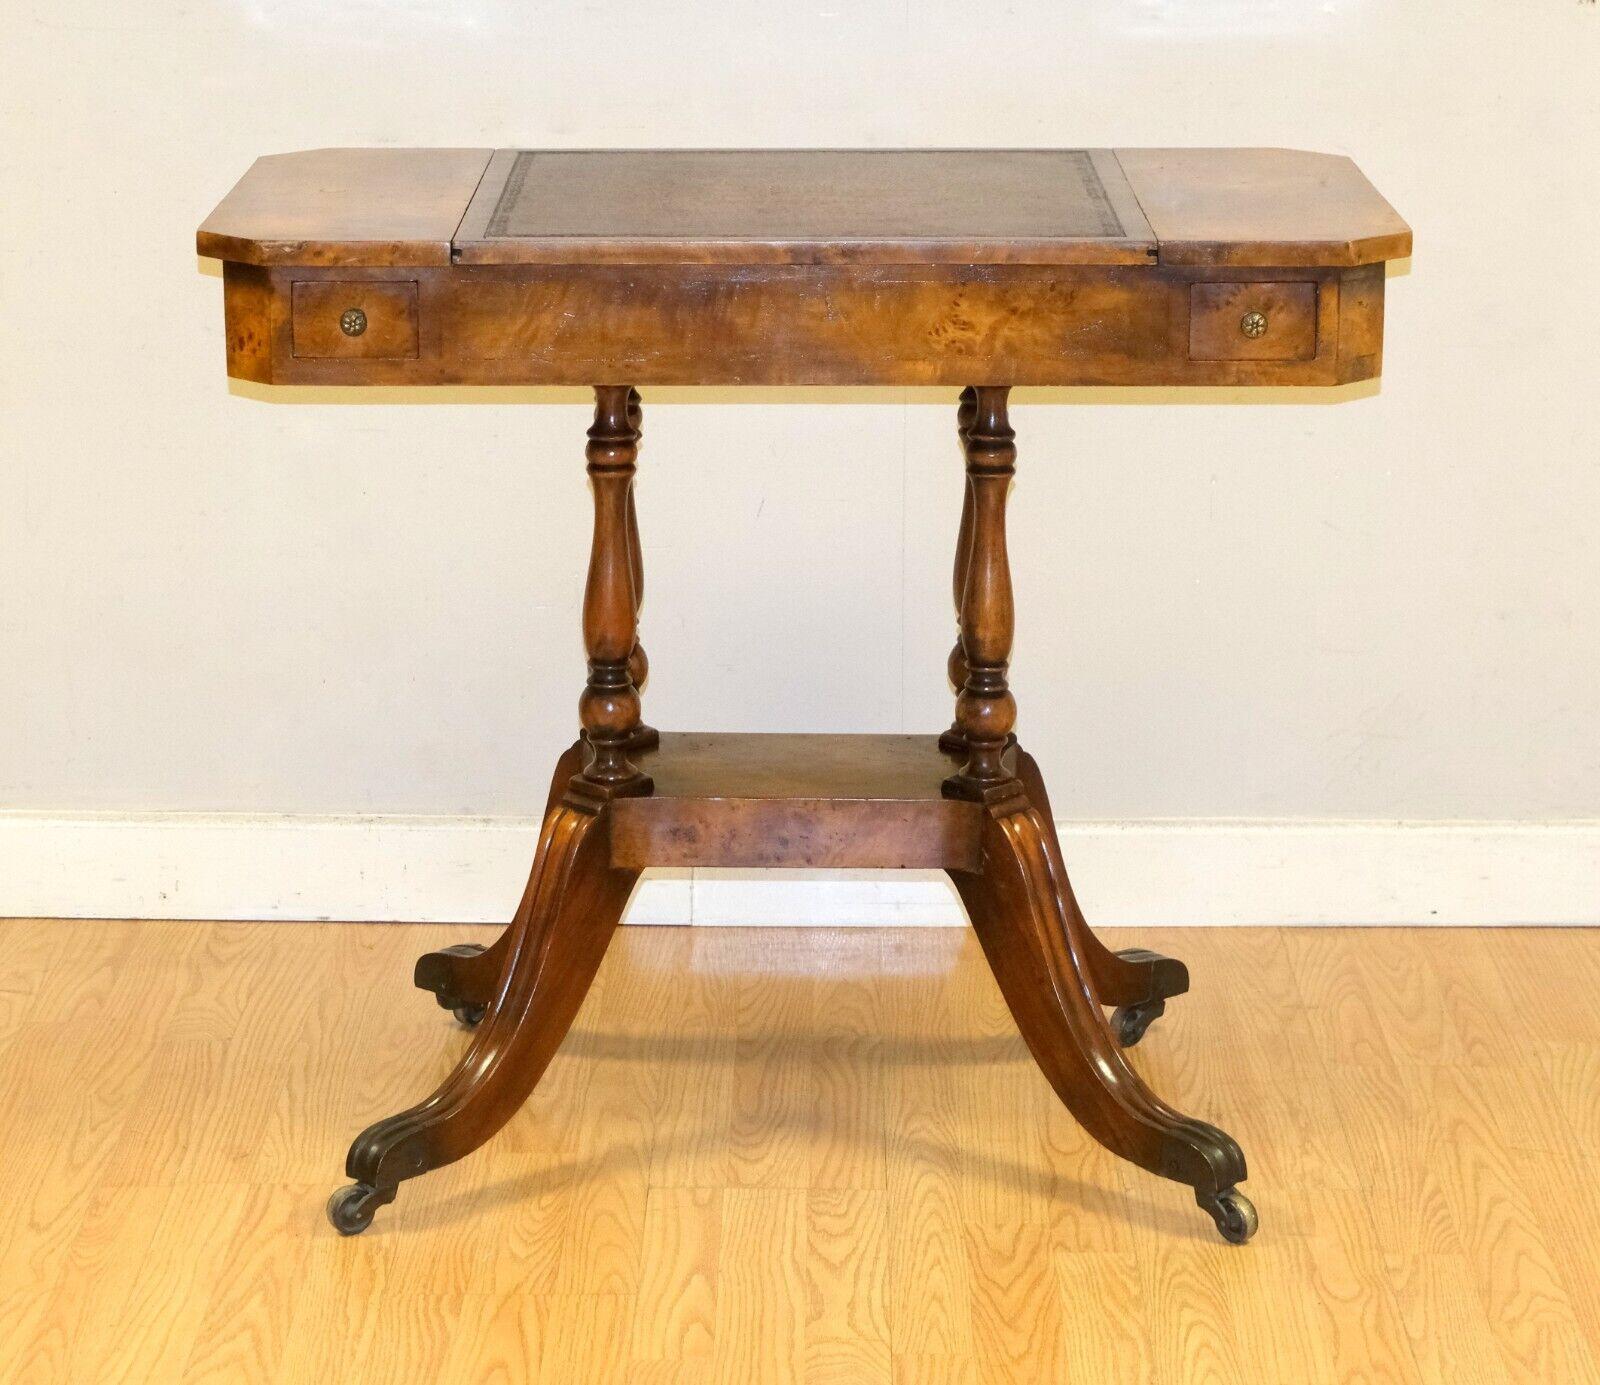 English THEODORE ALEXANDER BURR WALNUT BROWN LEATHER GAME CHEDD TABLE REVERSiBLE TOP